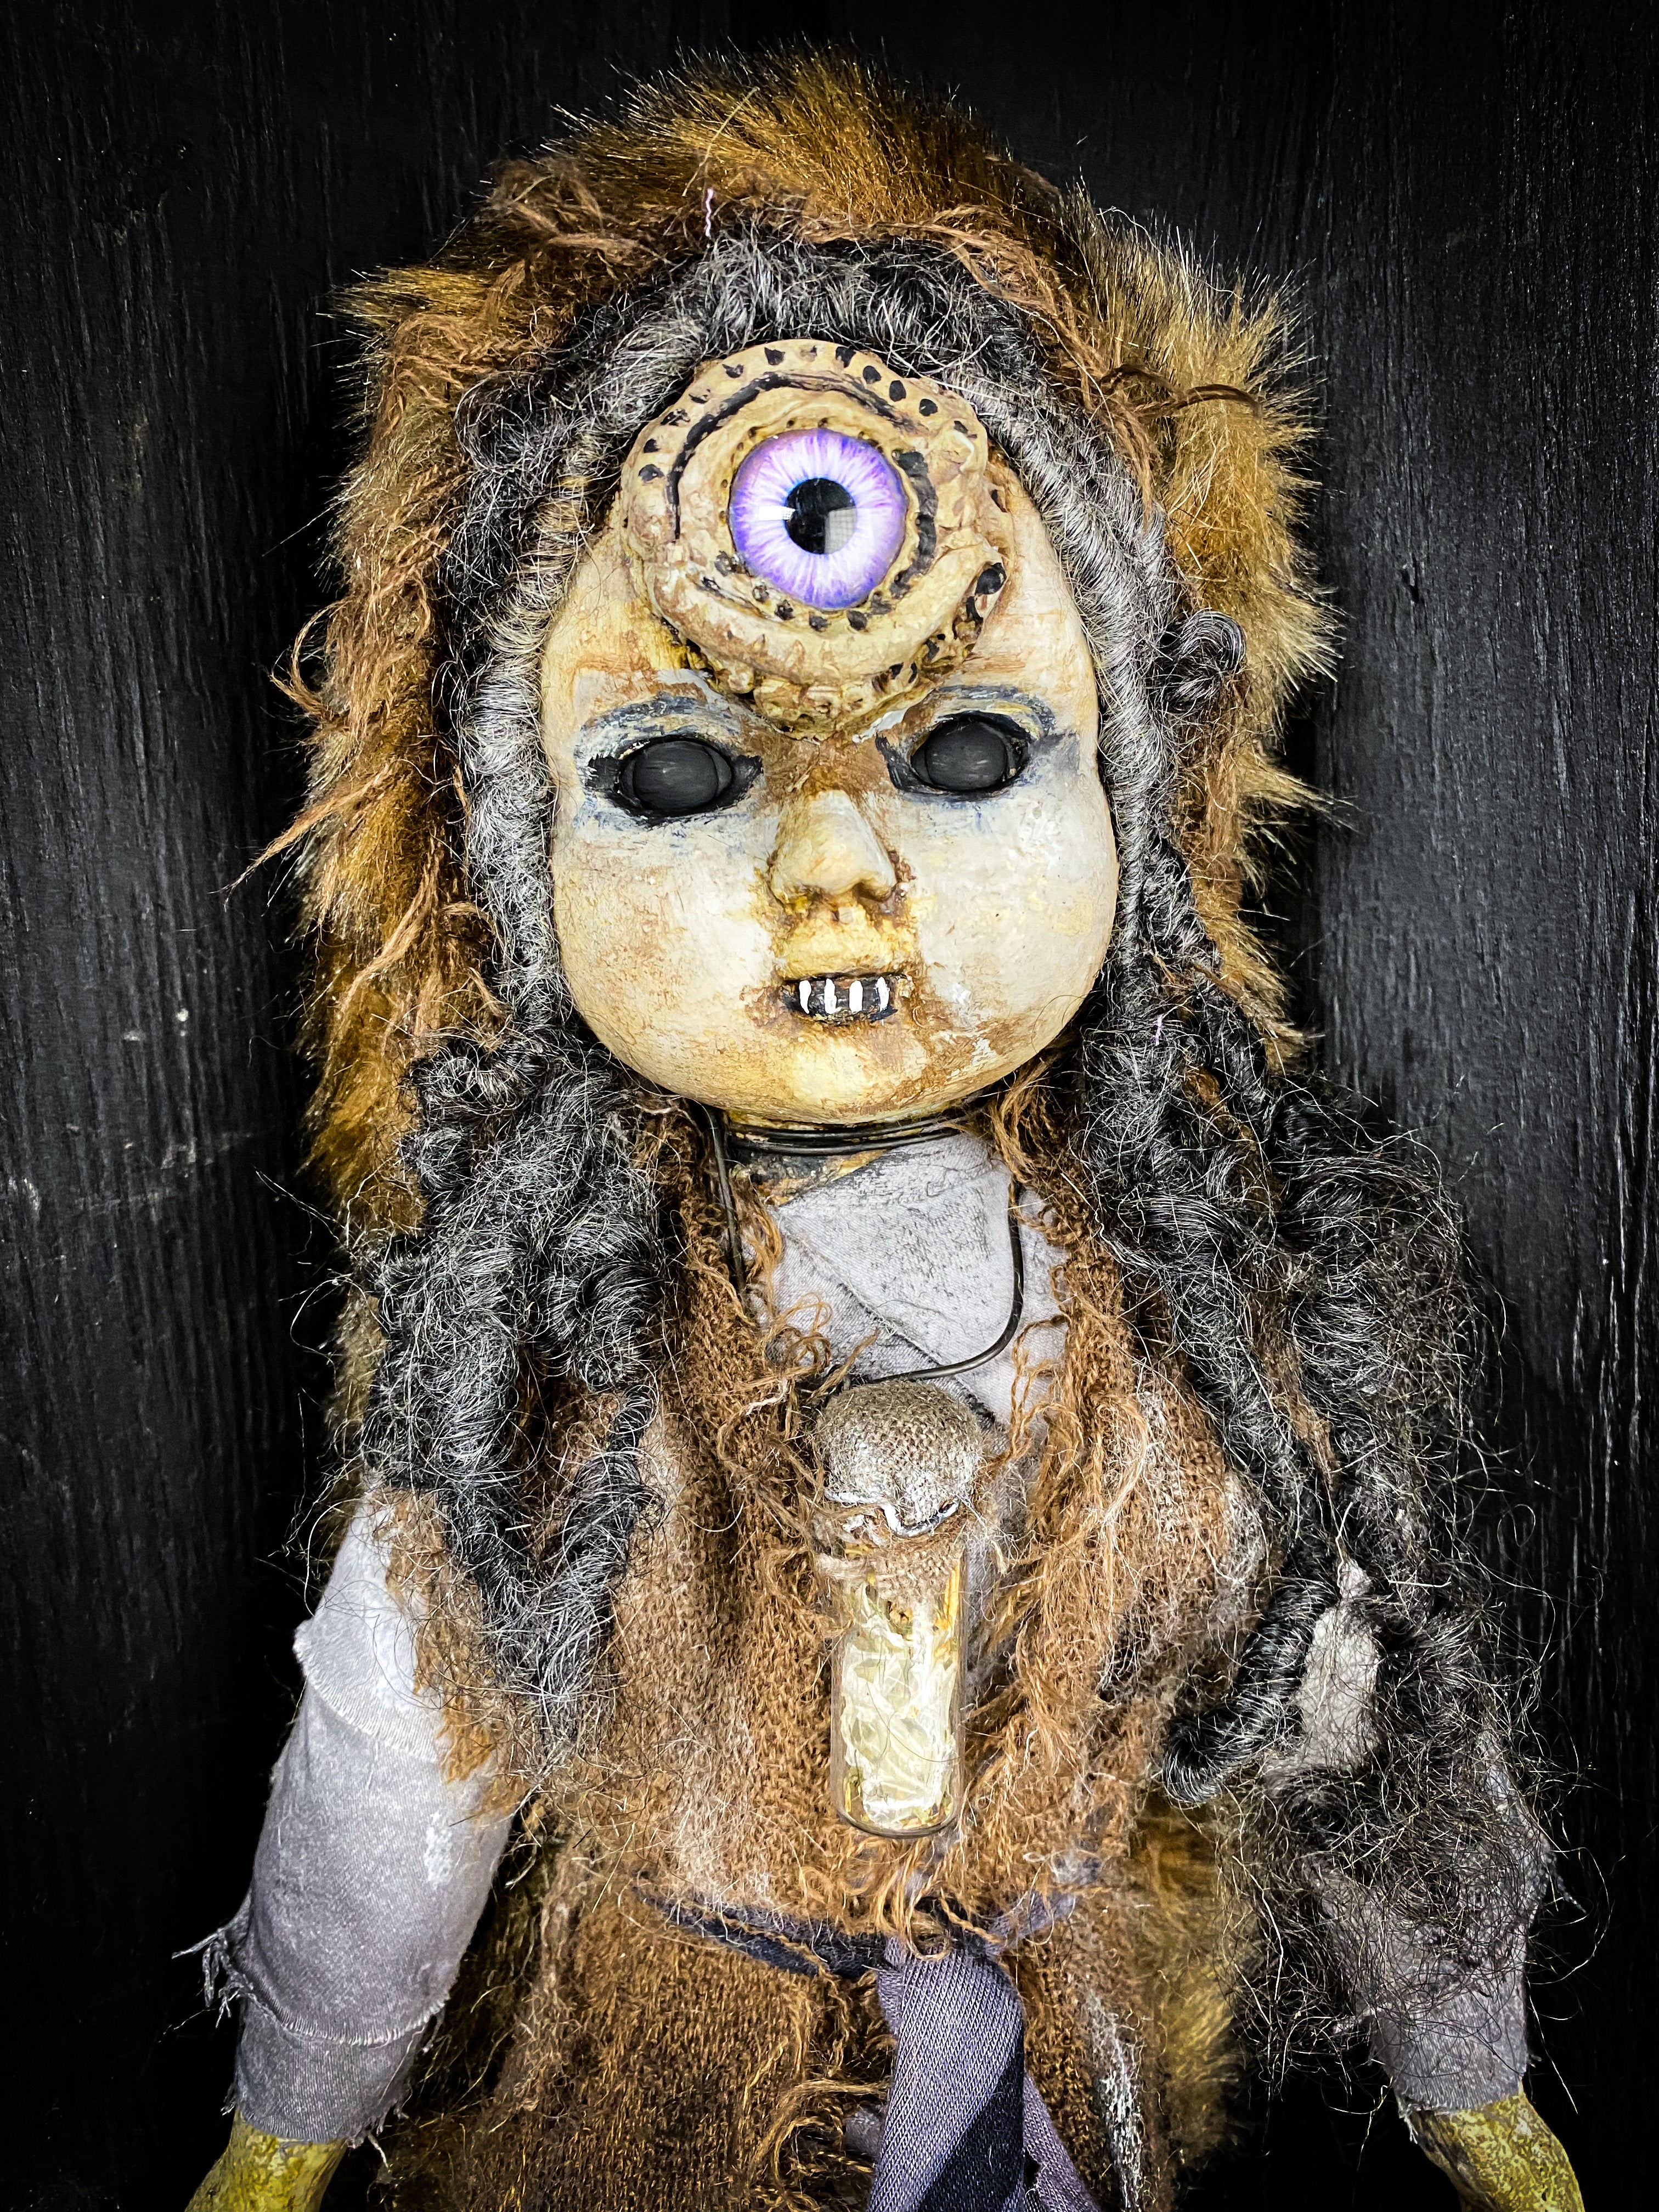 SHE WHO KNOWS - Spirit Doll